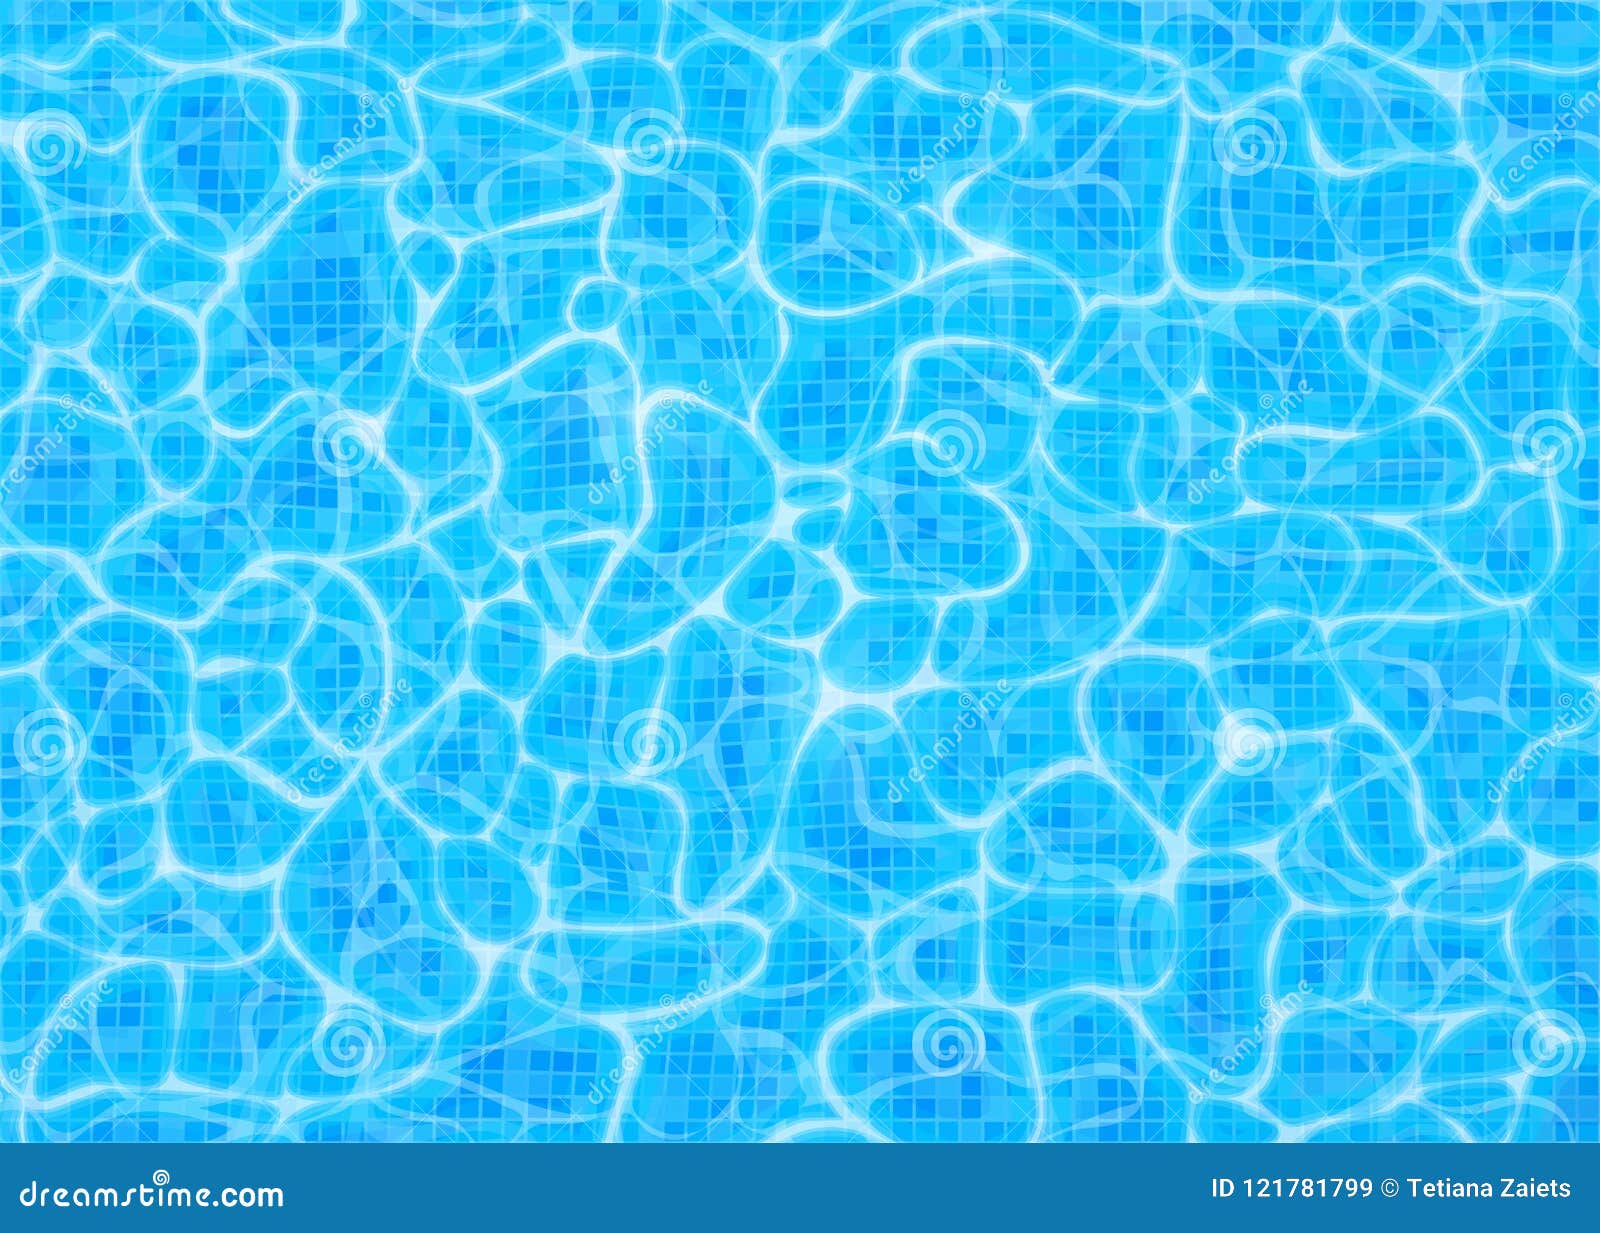 swimming pool bottom  background, ripple and flow with waves. summer aqua water pattern with digital tiles